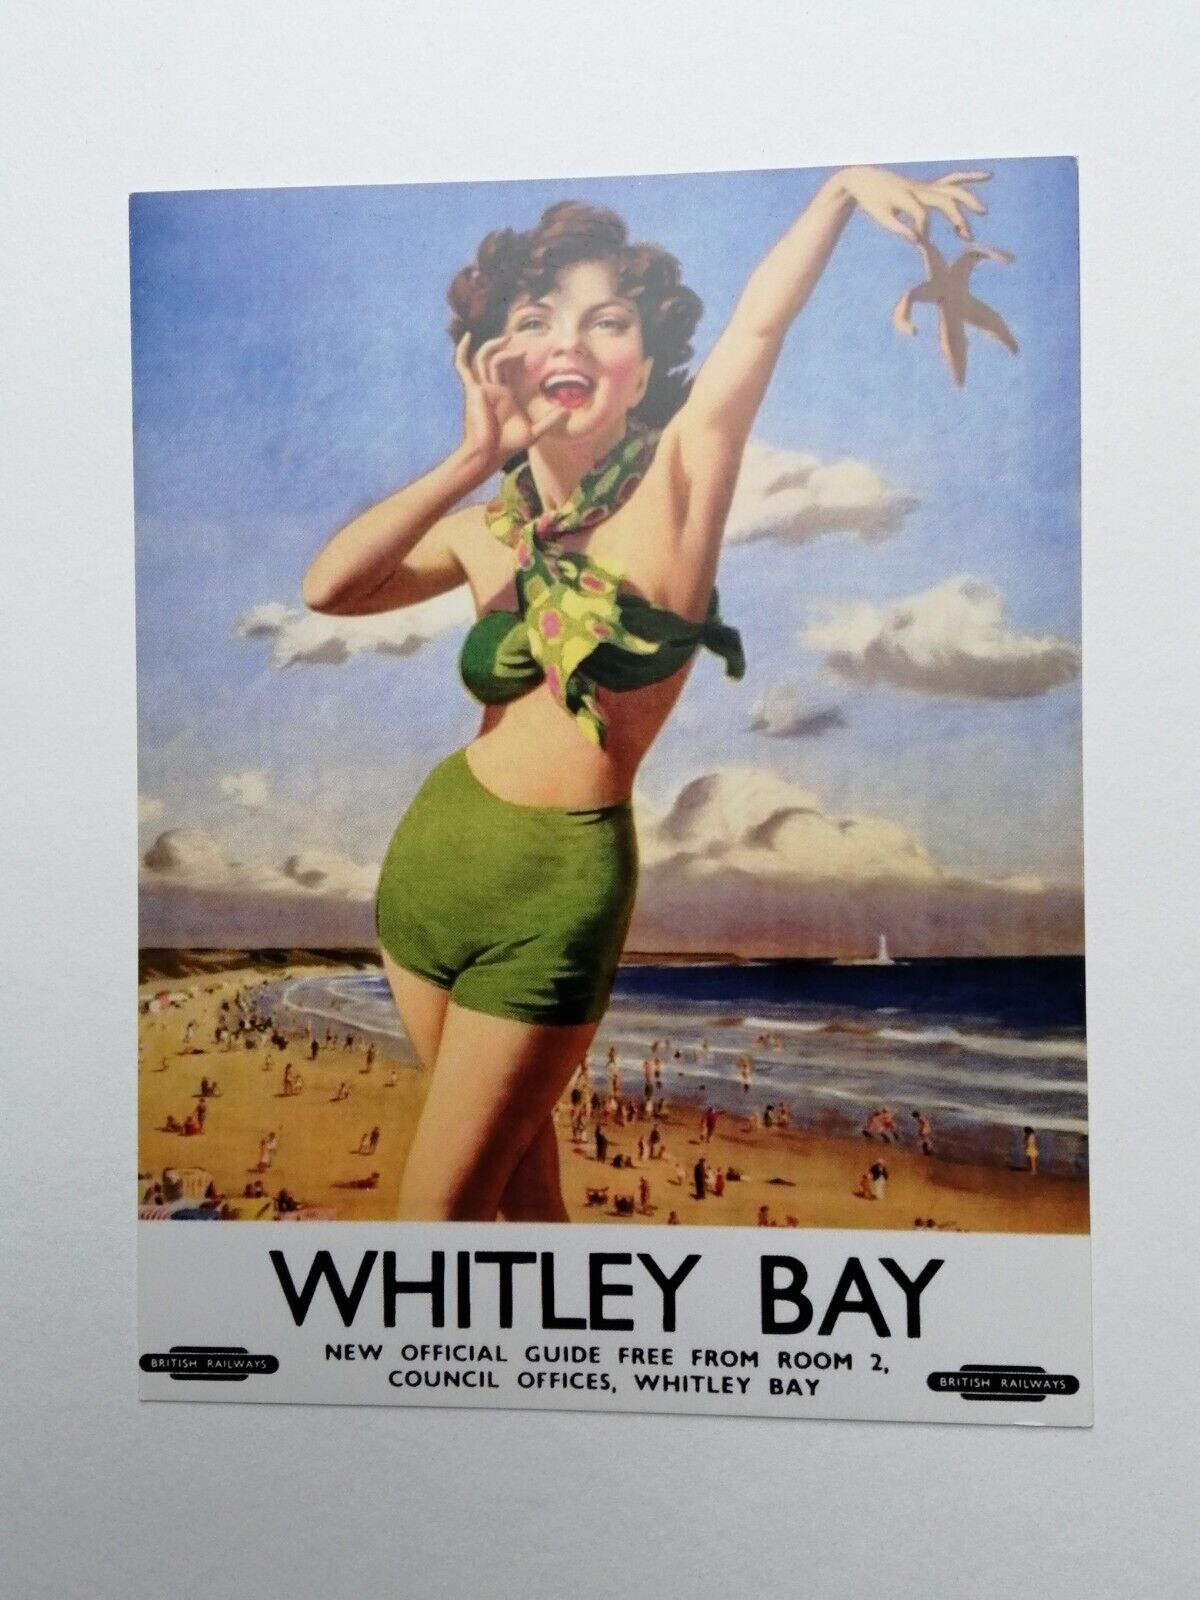 House Clearance - Vintage Tourist Poster on a Service Whitley Bay